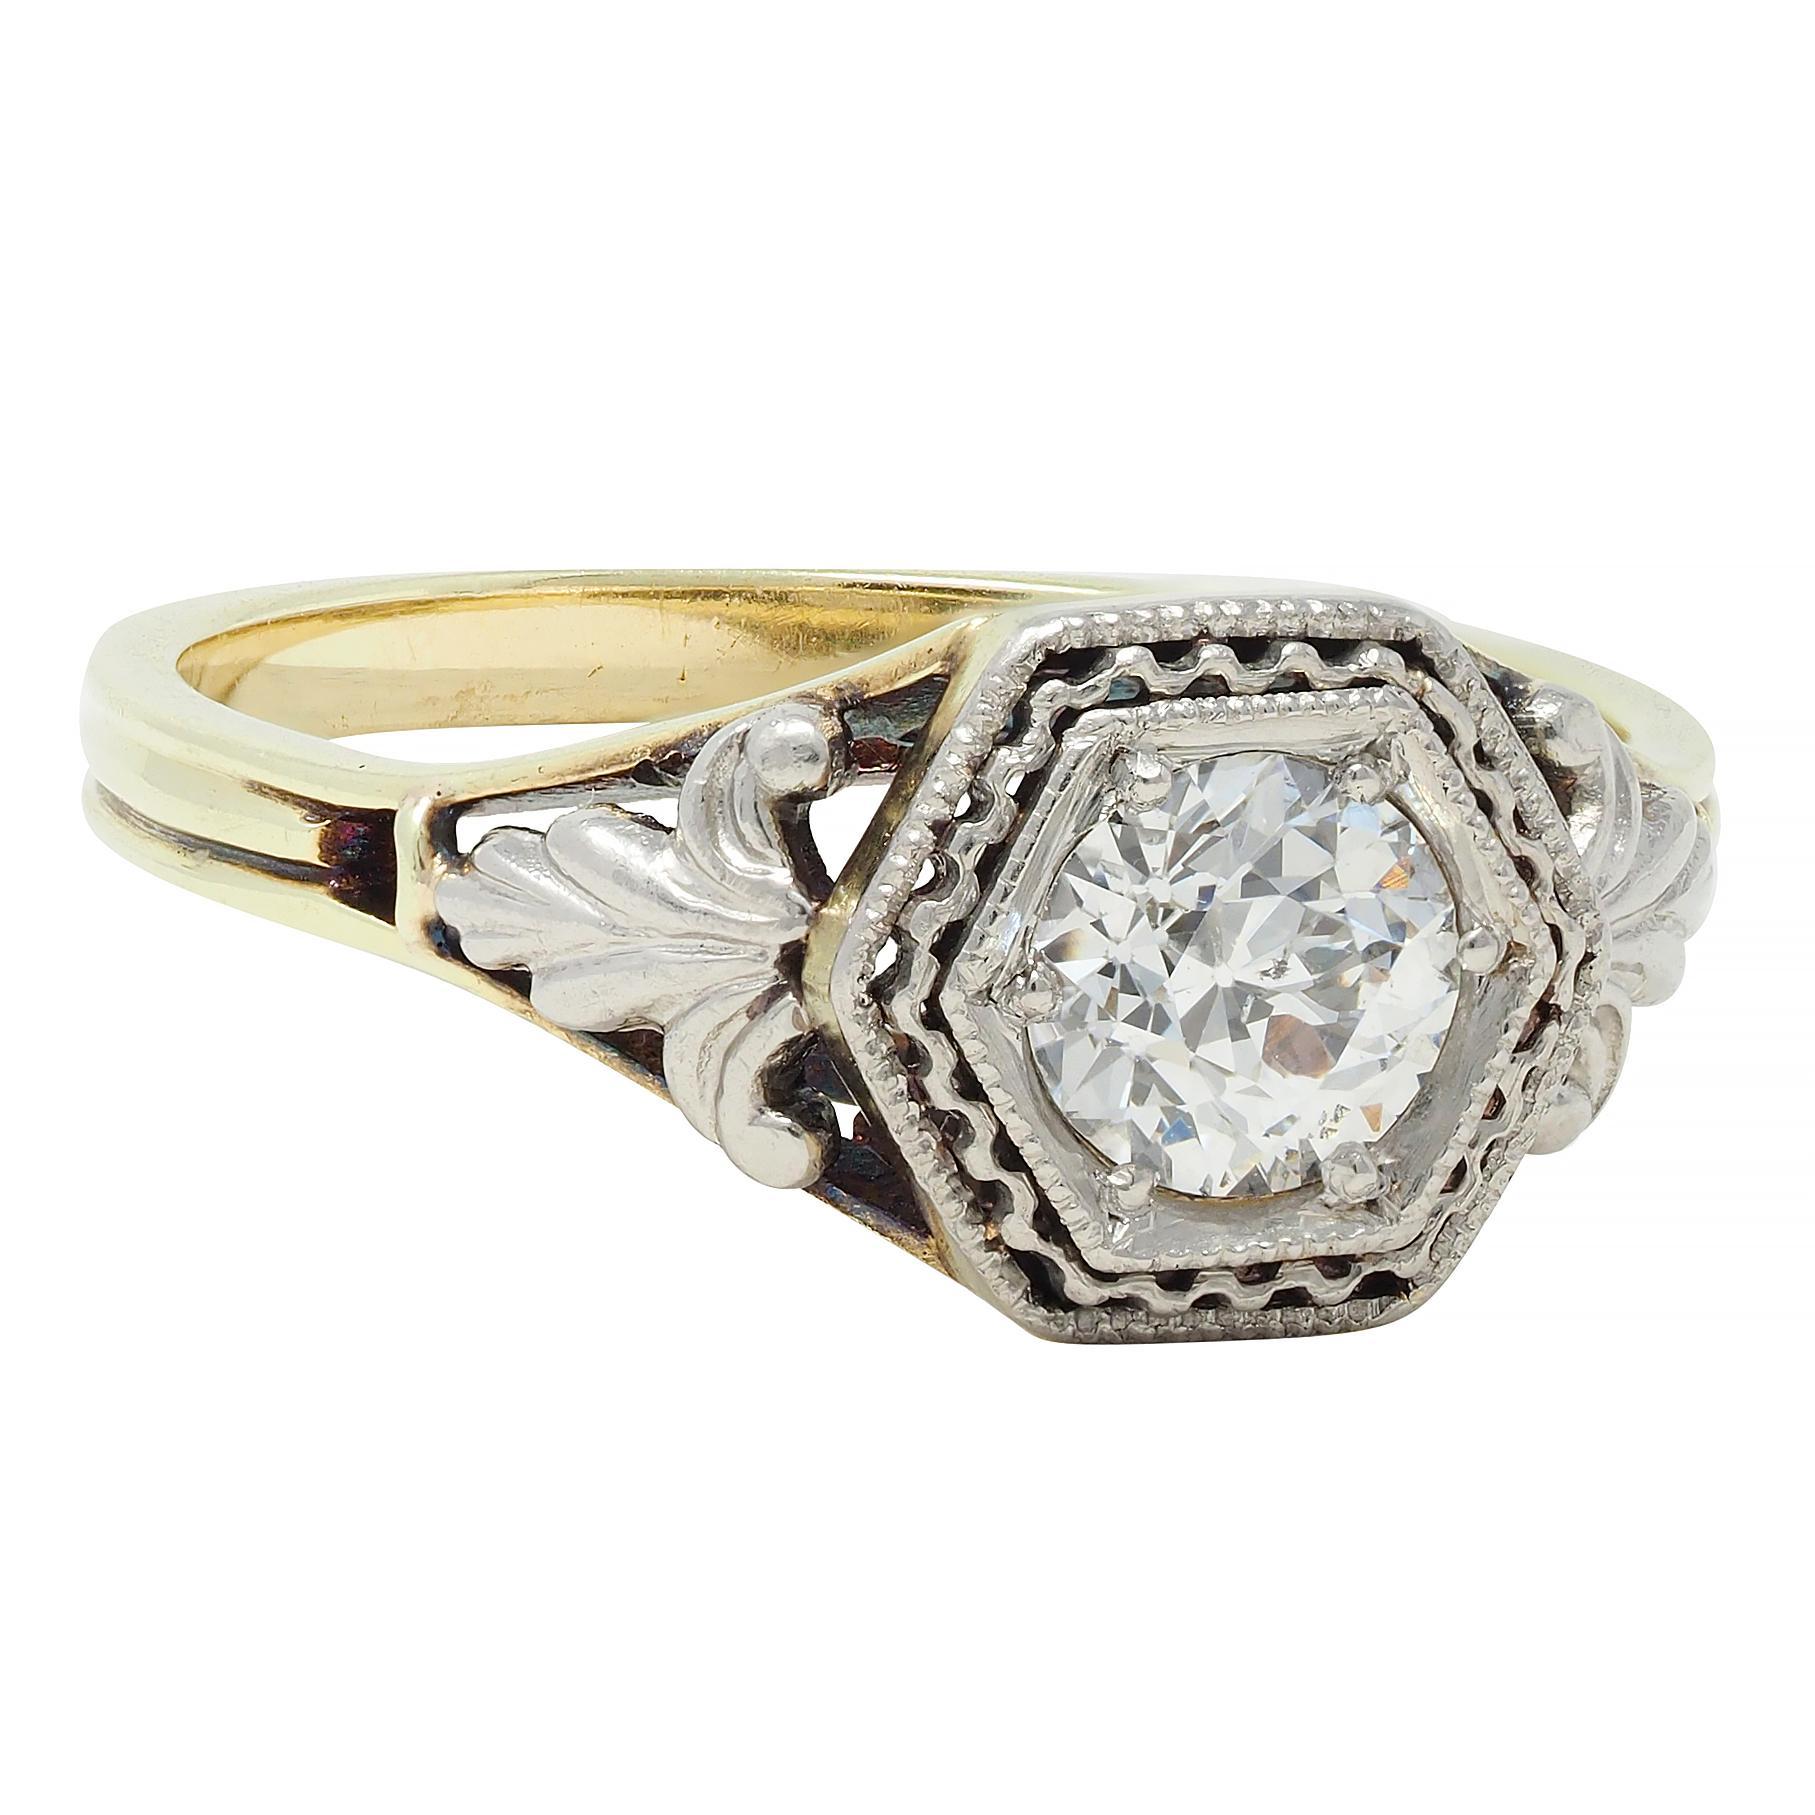 Centering an old European cut diamond weighing approximately 0.51 carat total - H color with SI2 clarity
Bead set in a platinum-topped hexagonal form head with squiggle motif filigree halo 
Planked by pierced platinum foliate motif appliqué